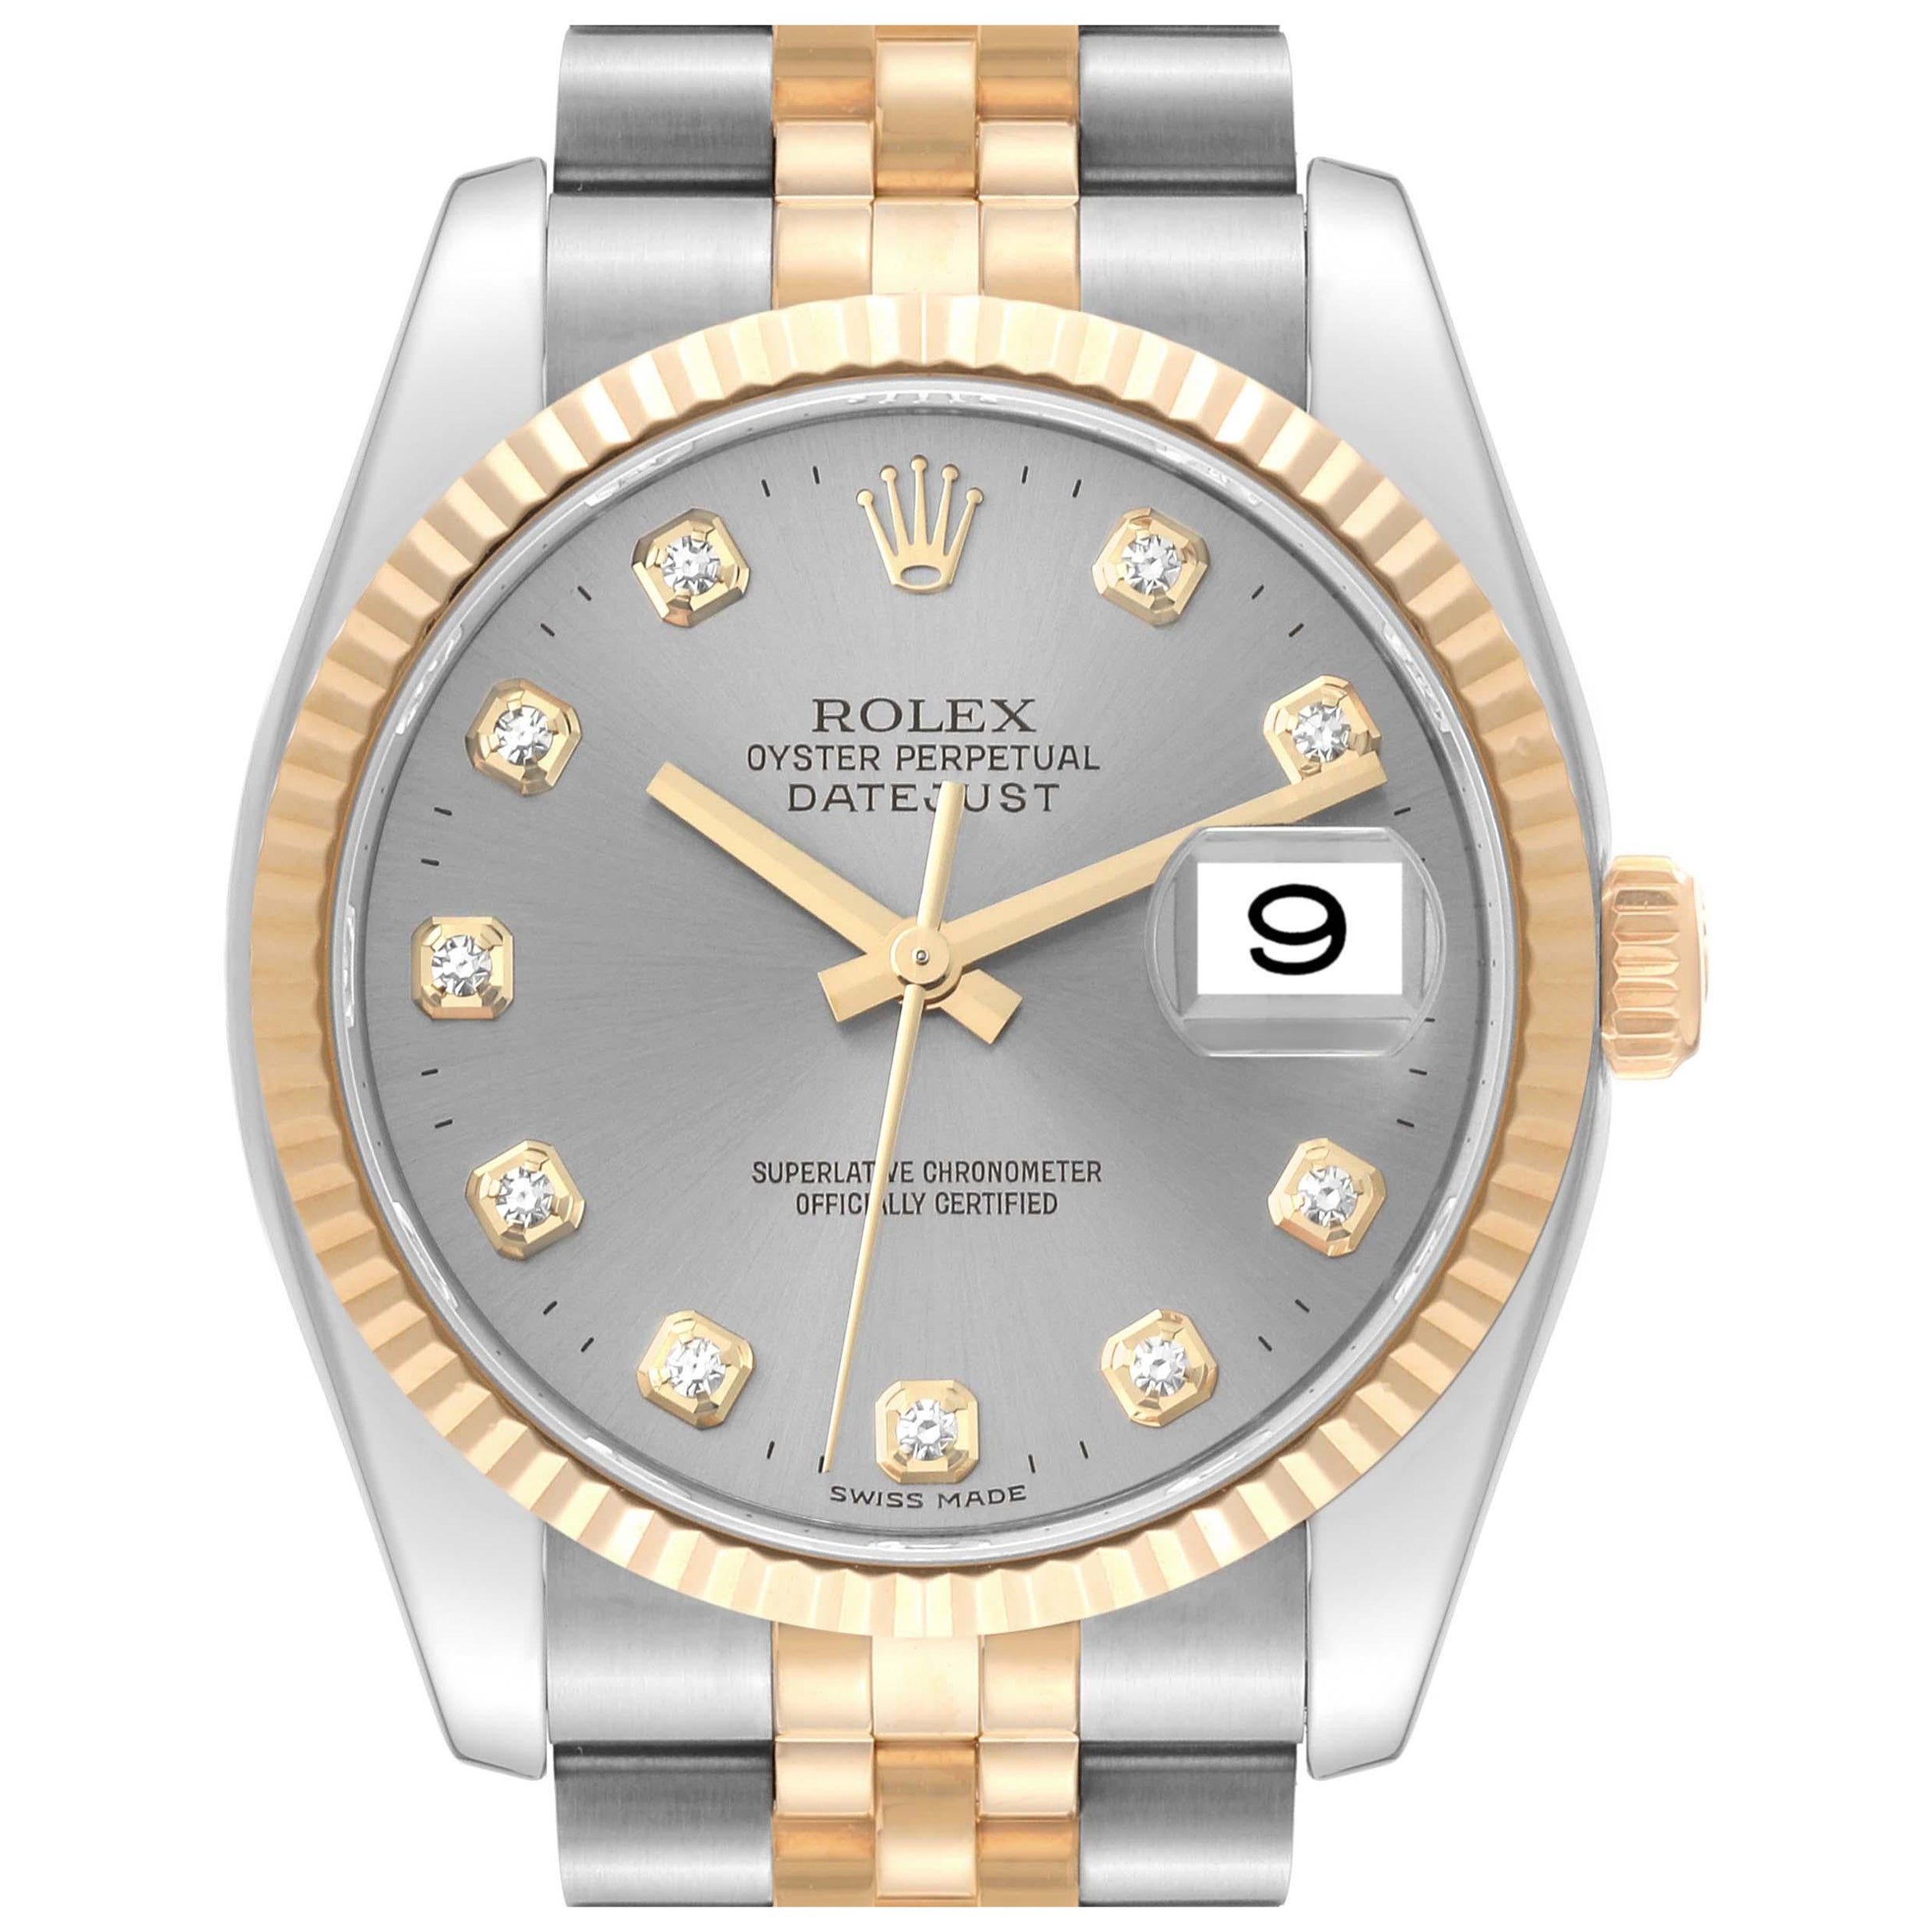 Rolex Datejust Steel Yellow Gold Diamond Dial Mens Watch 116233 Box Papers